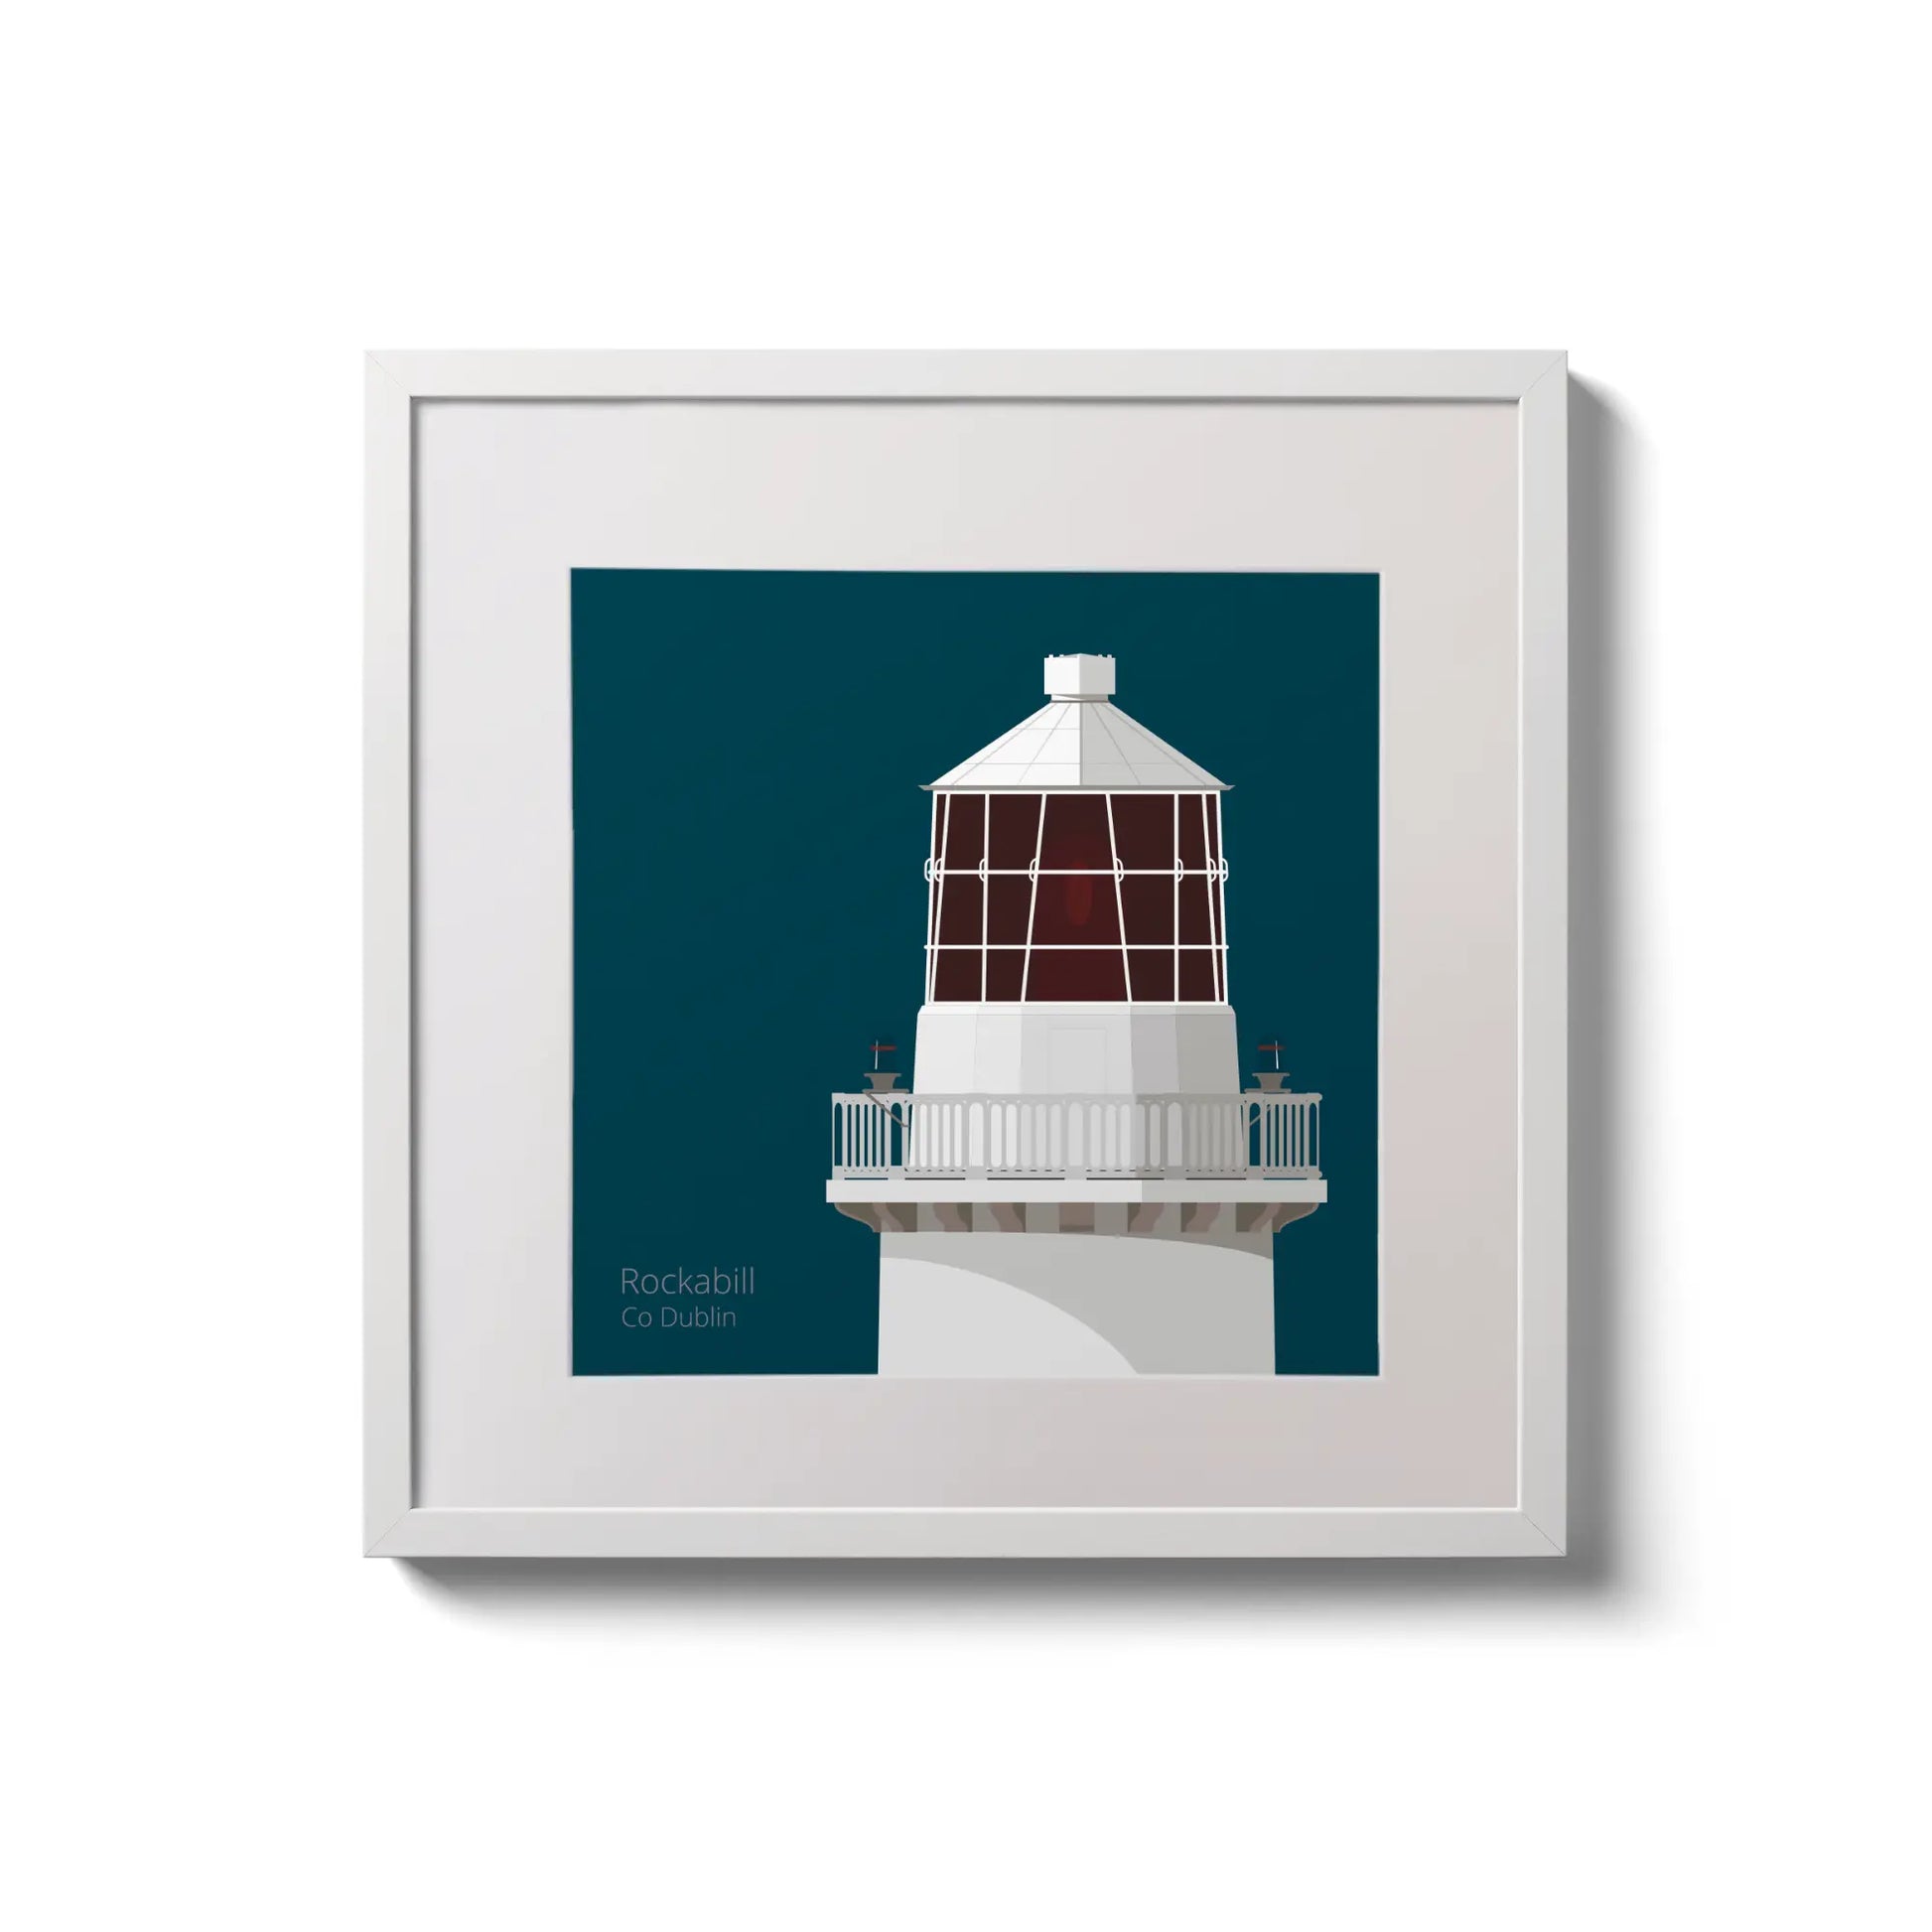 Illustration of Rockabill lighthouse on a midnight blue background,  in a white square frame measuring 20x20cm.